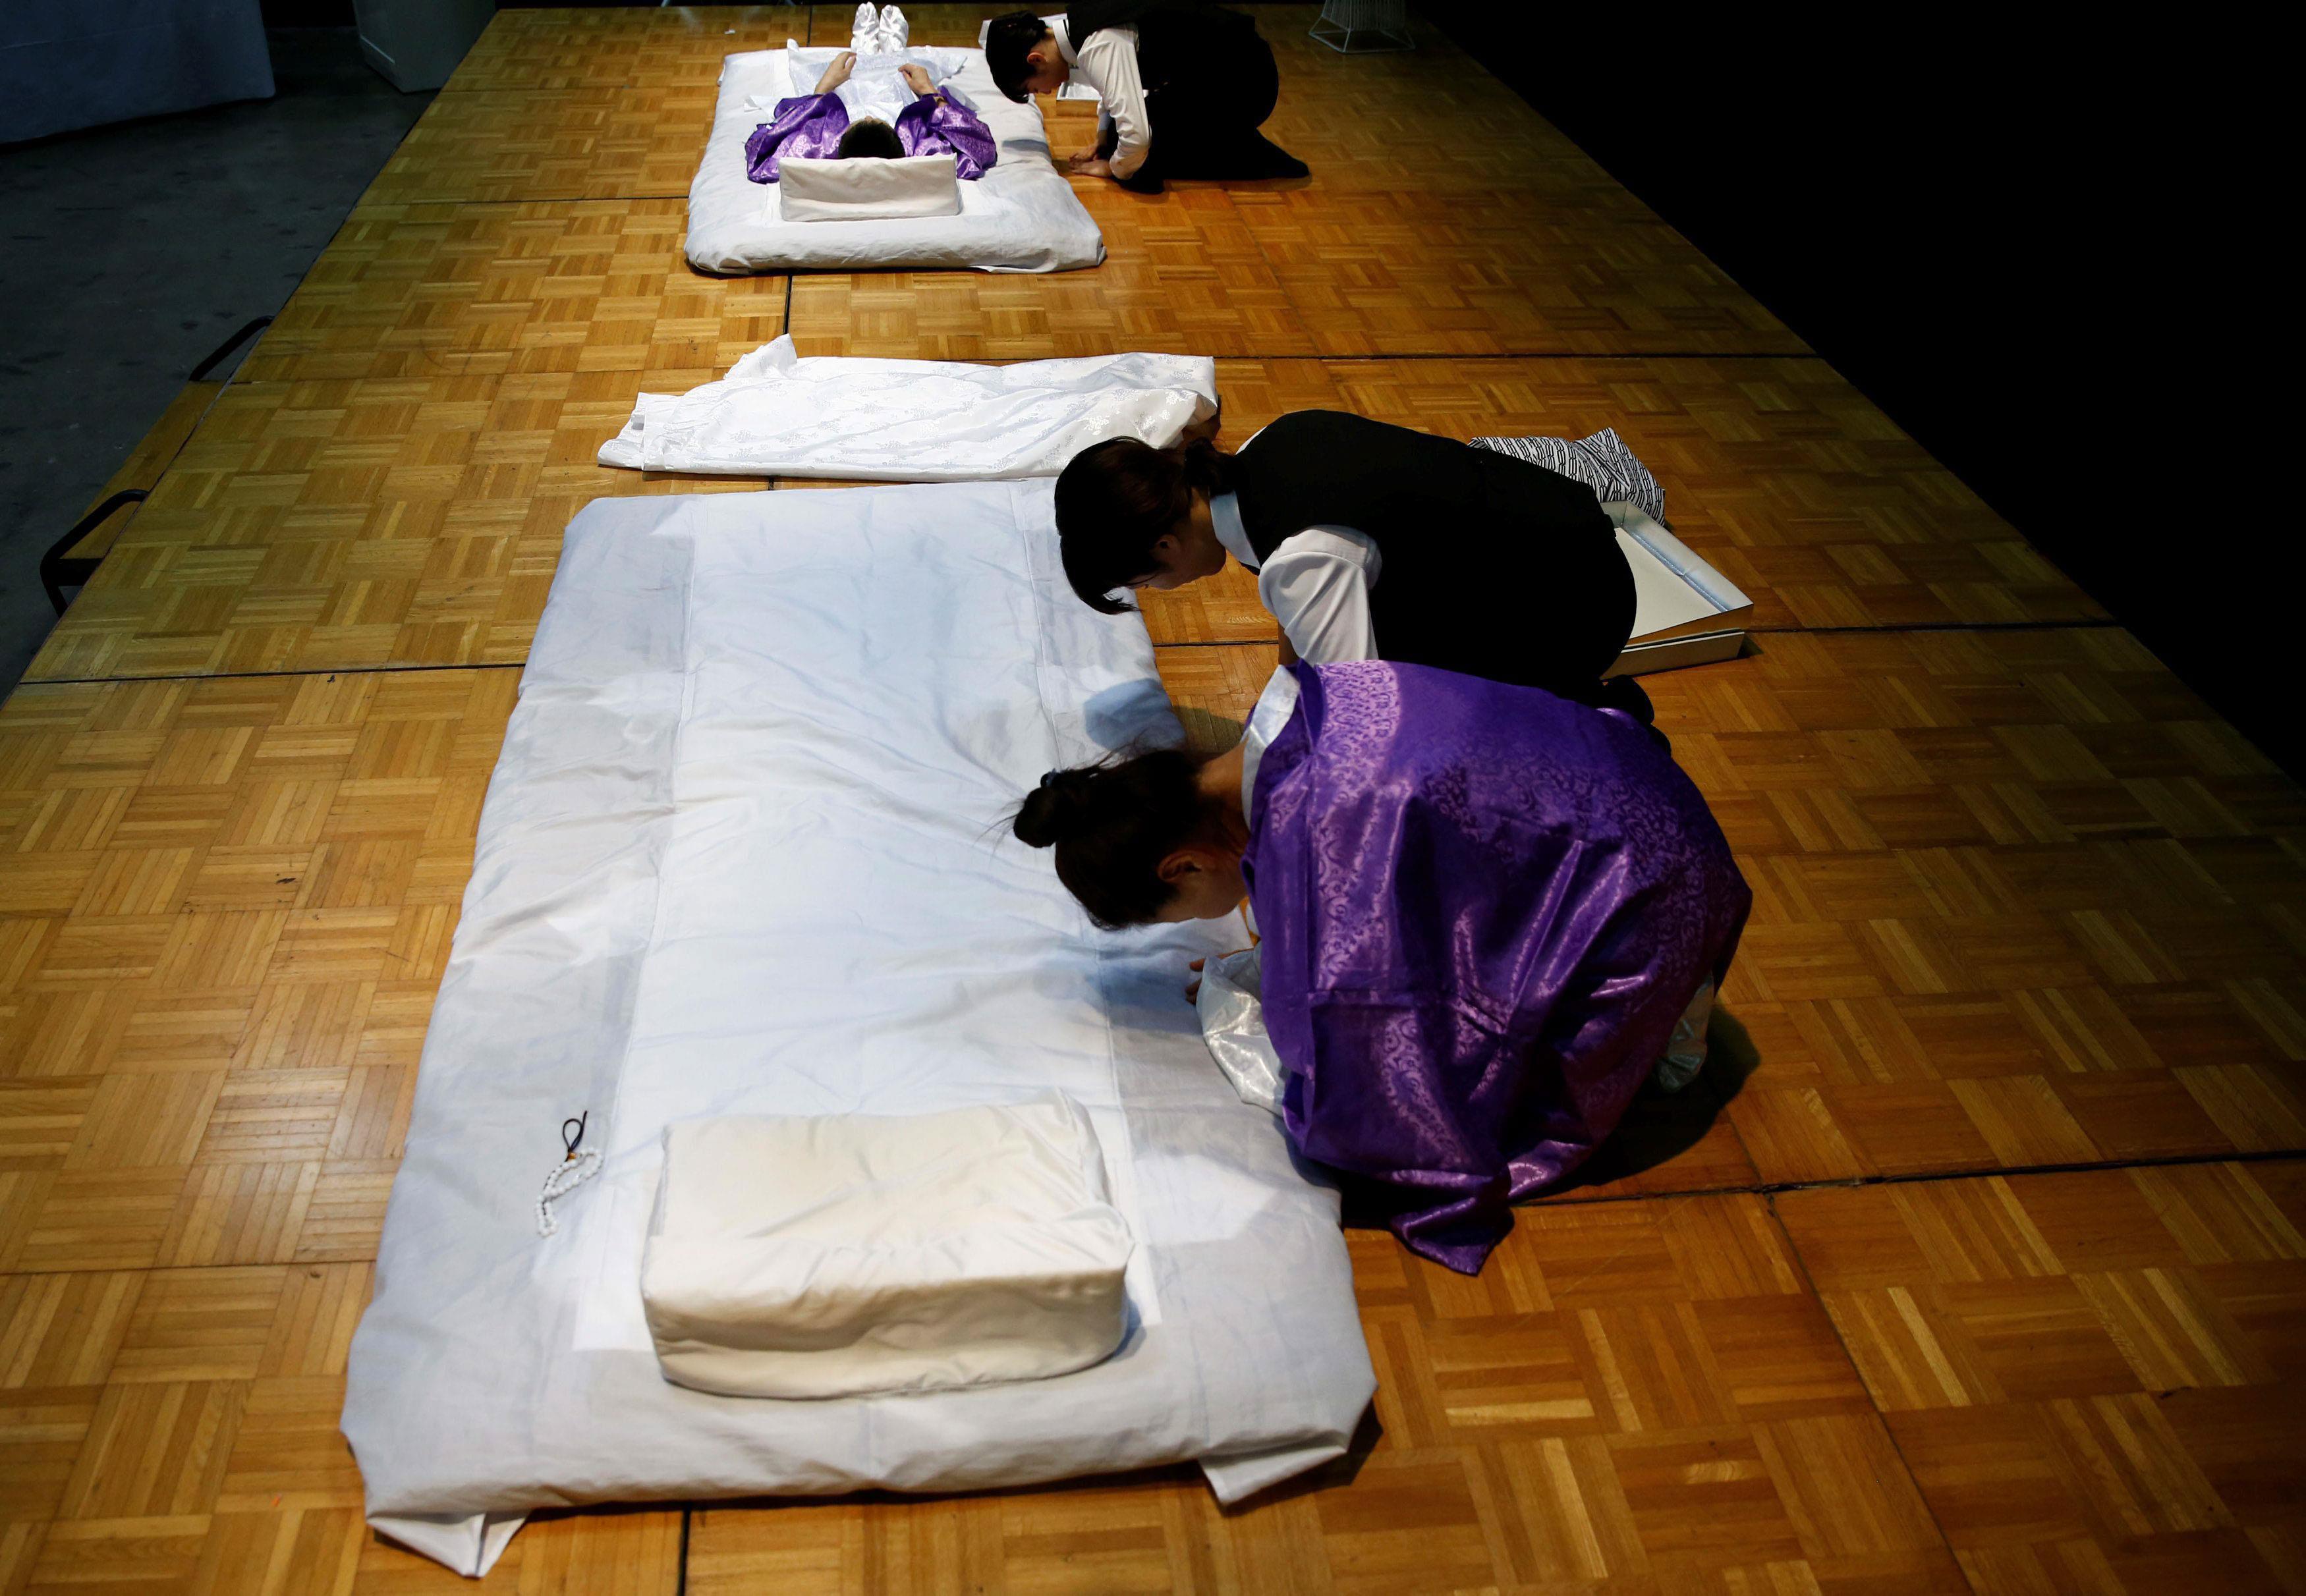 A funeral undertaker and a model greet spectators during an encoffinment competition at Life Ending 